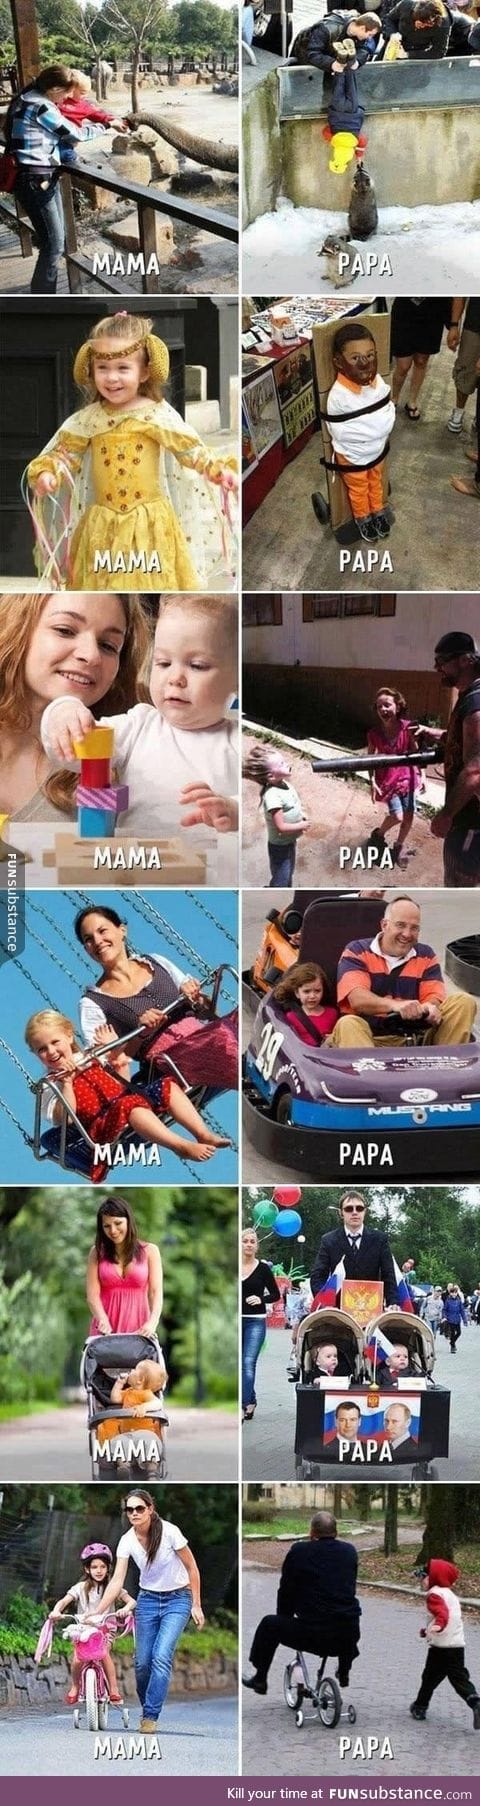 The difference between moms and dads